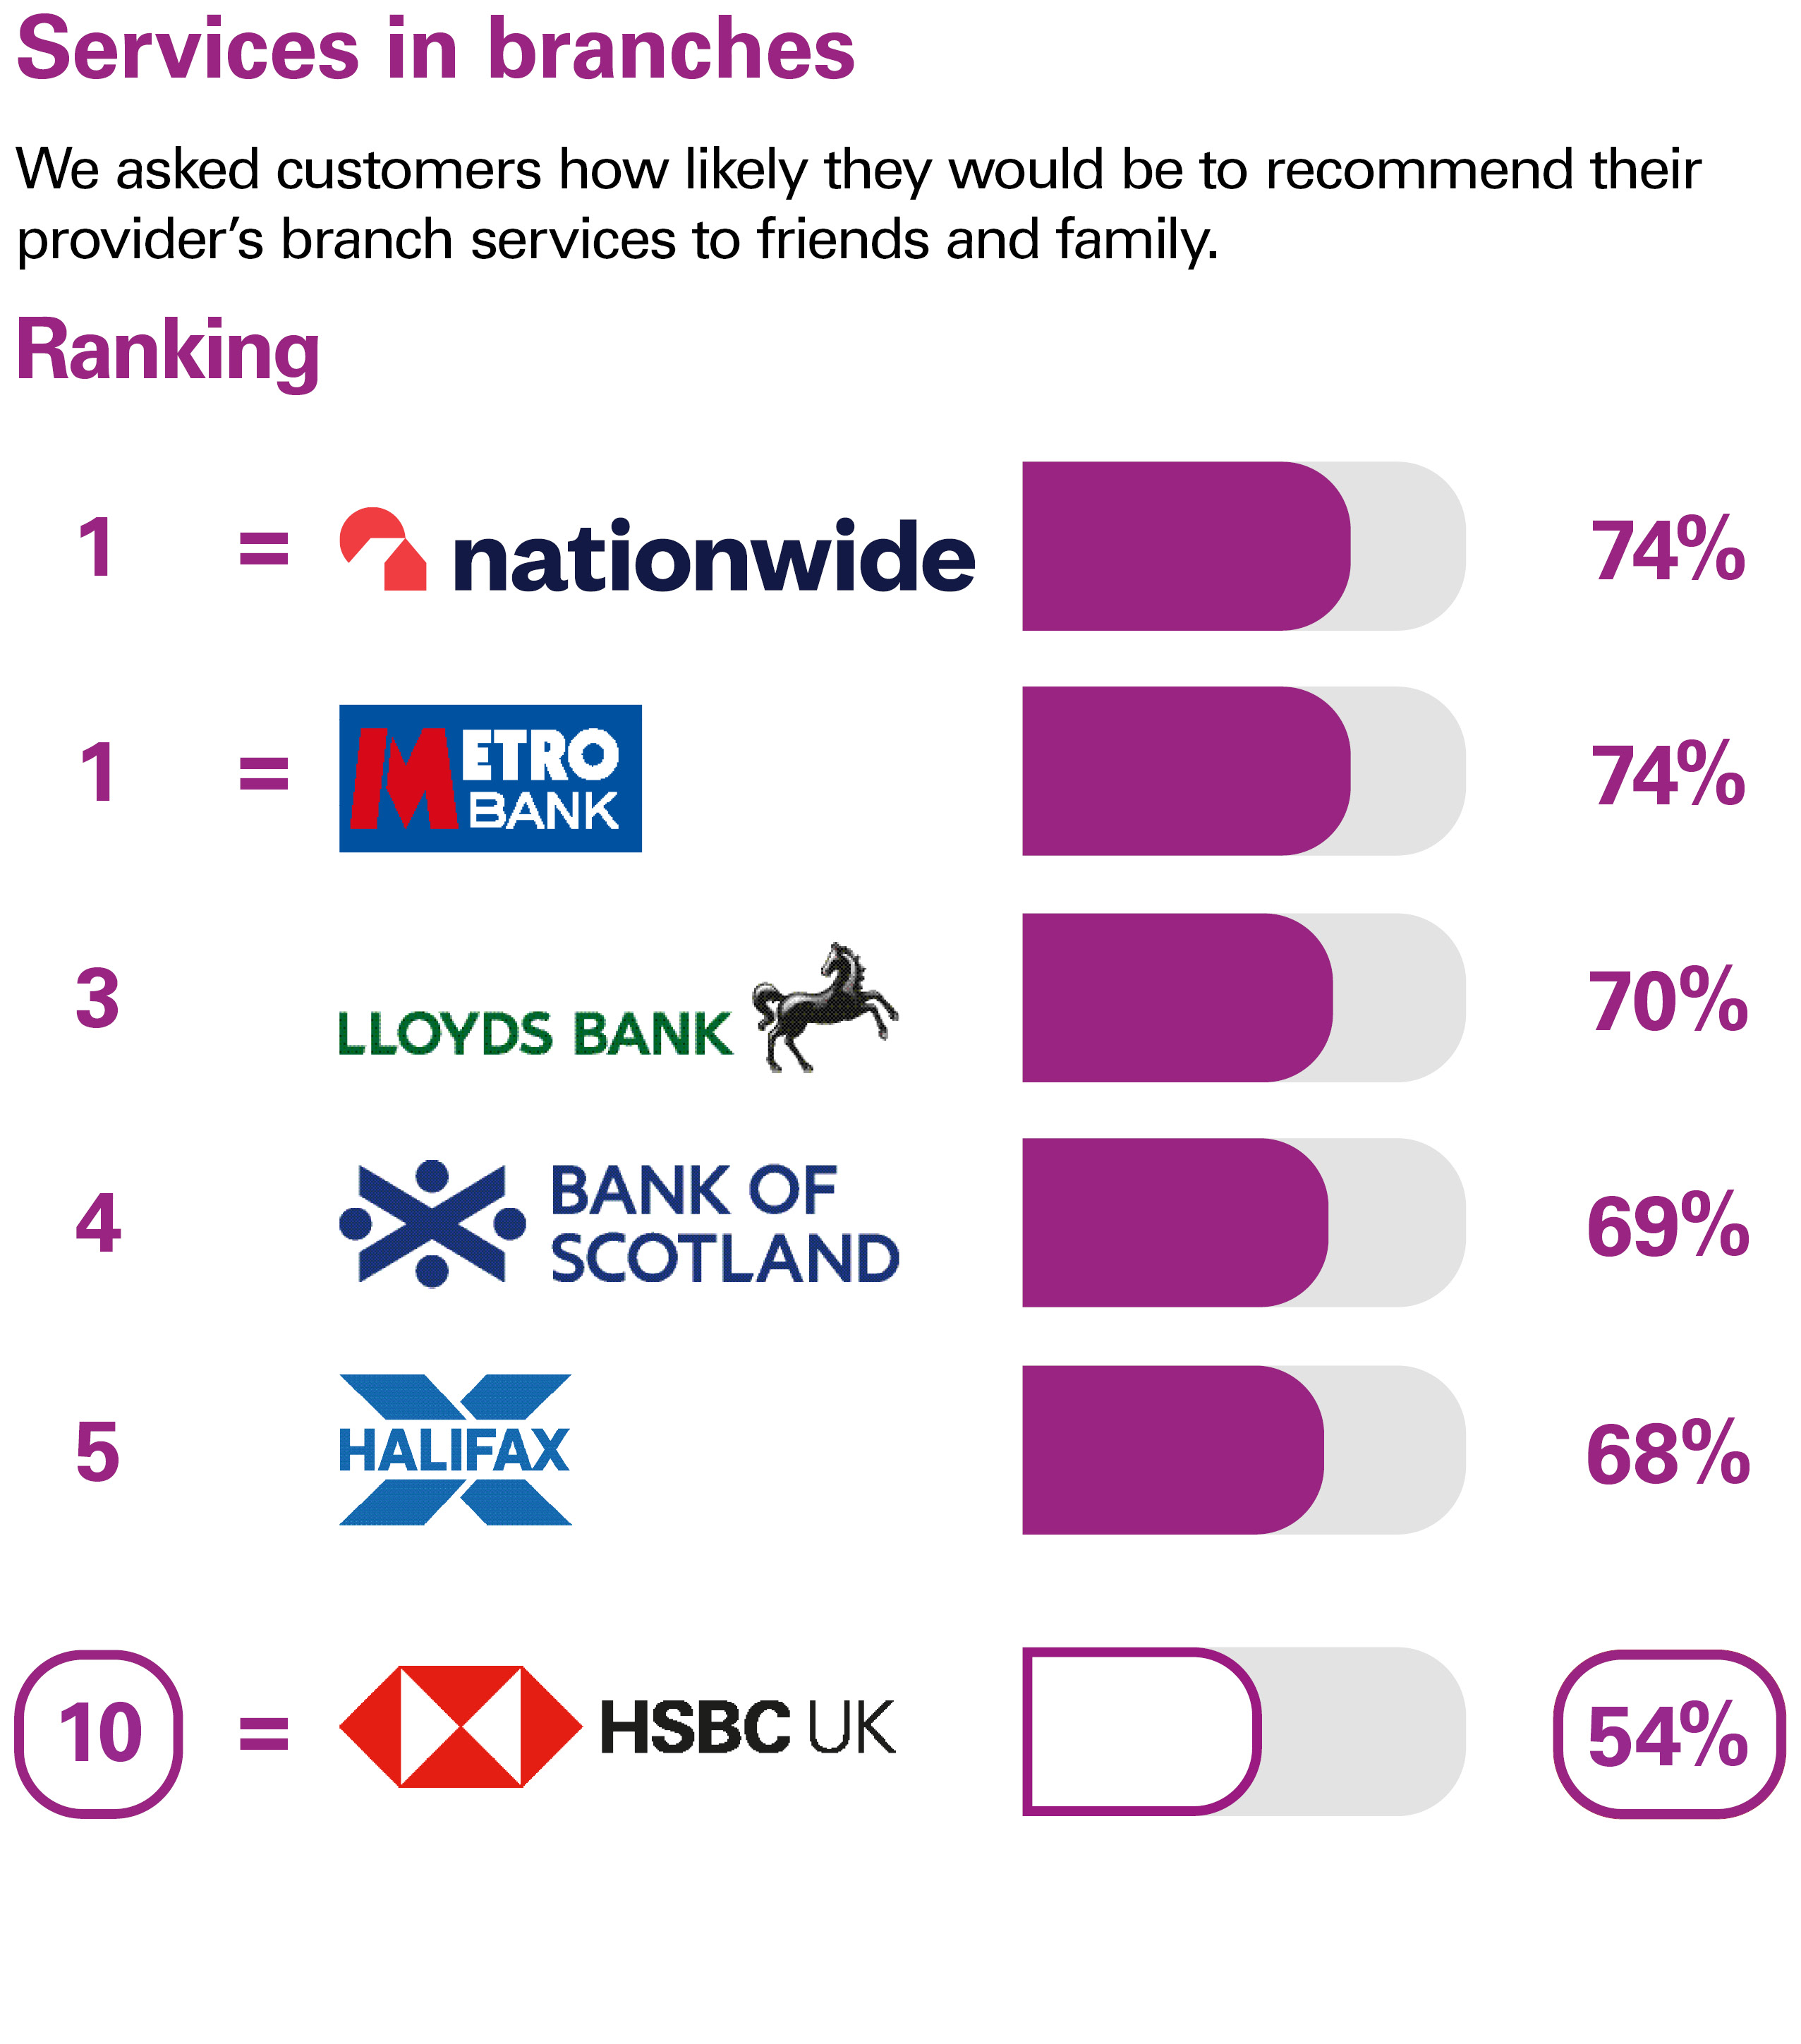 Services in branches. We asked customers how likely they would be to recommend their provider’s branch services to friends and family. Ranking: equal 1 Nationwide 74% equal 1 Metro Bank 74% 3 Lloyds Bank 70% 4 Bank of Scotland 69% 5 Halifax 68% equal 10 HSBC UK 54%.